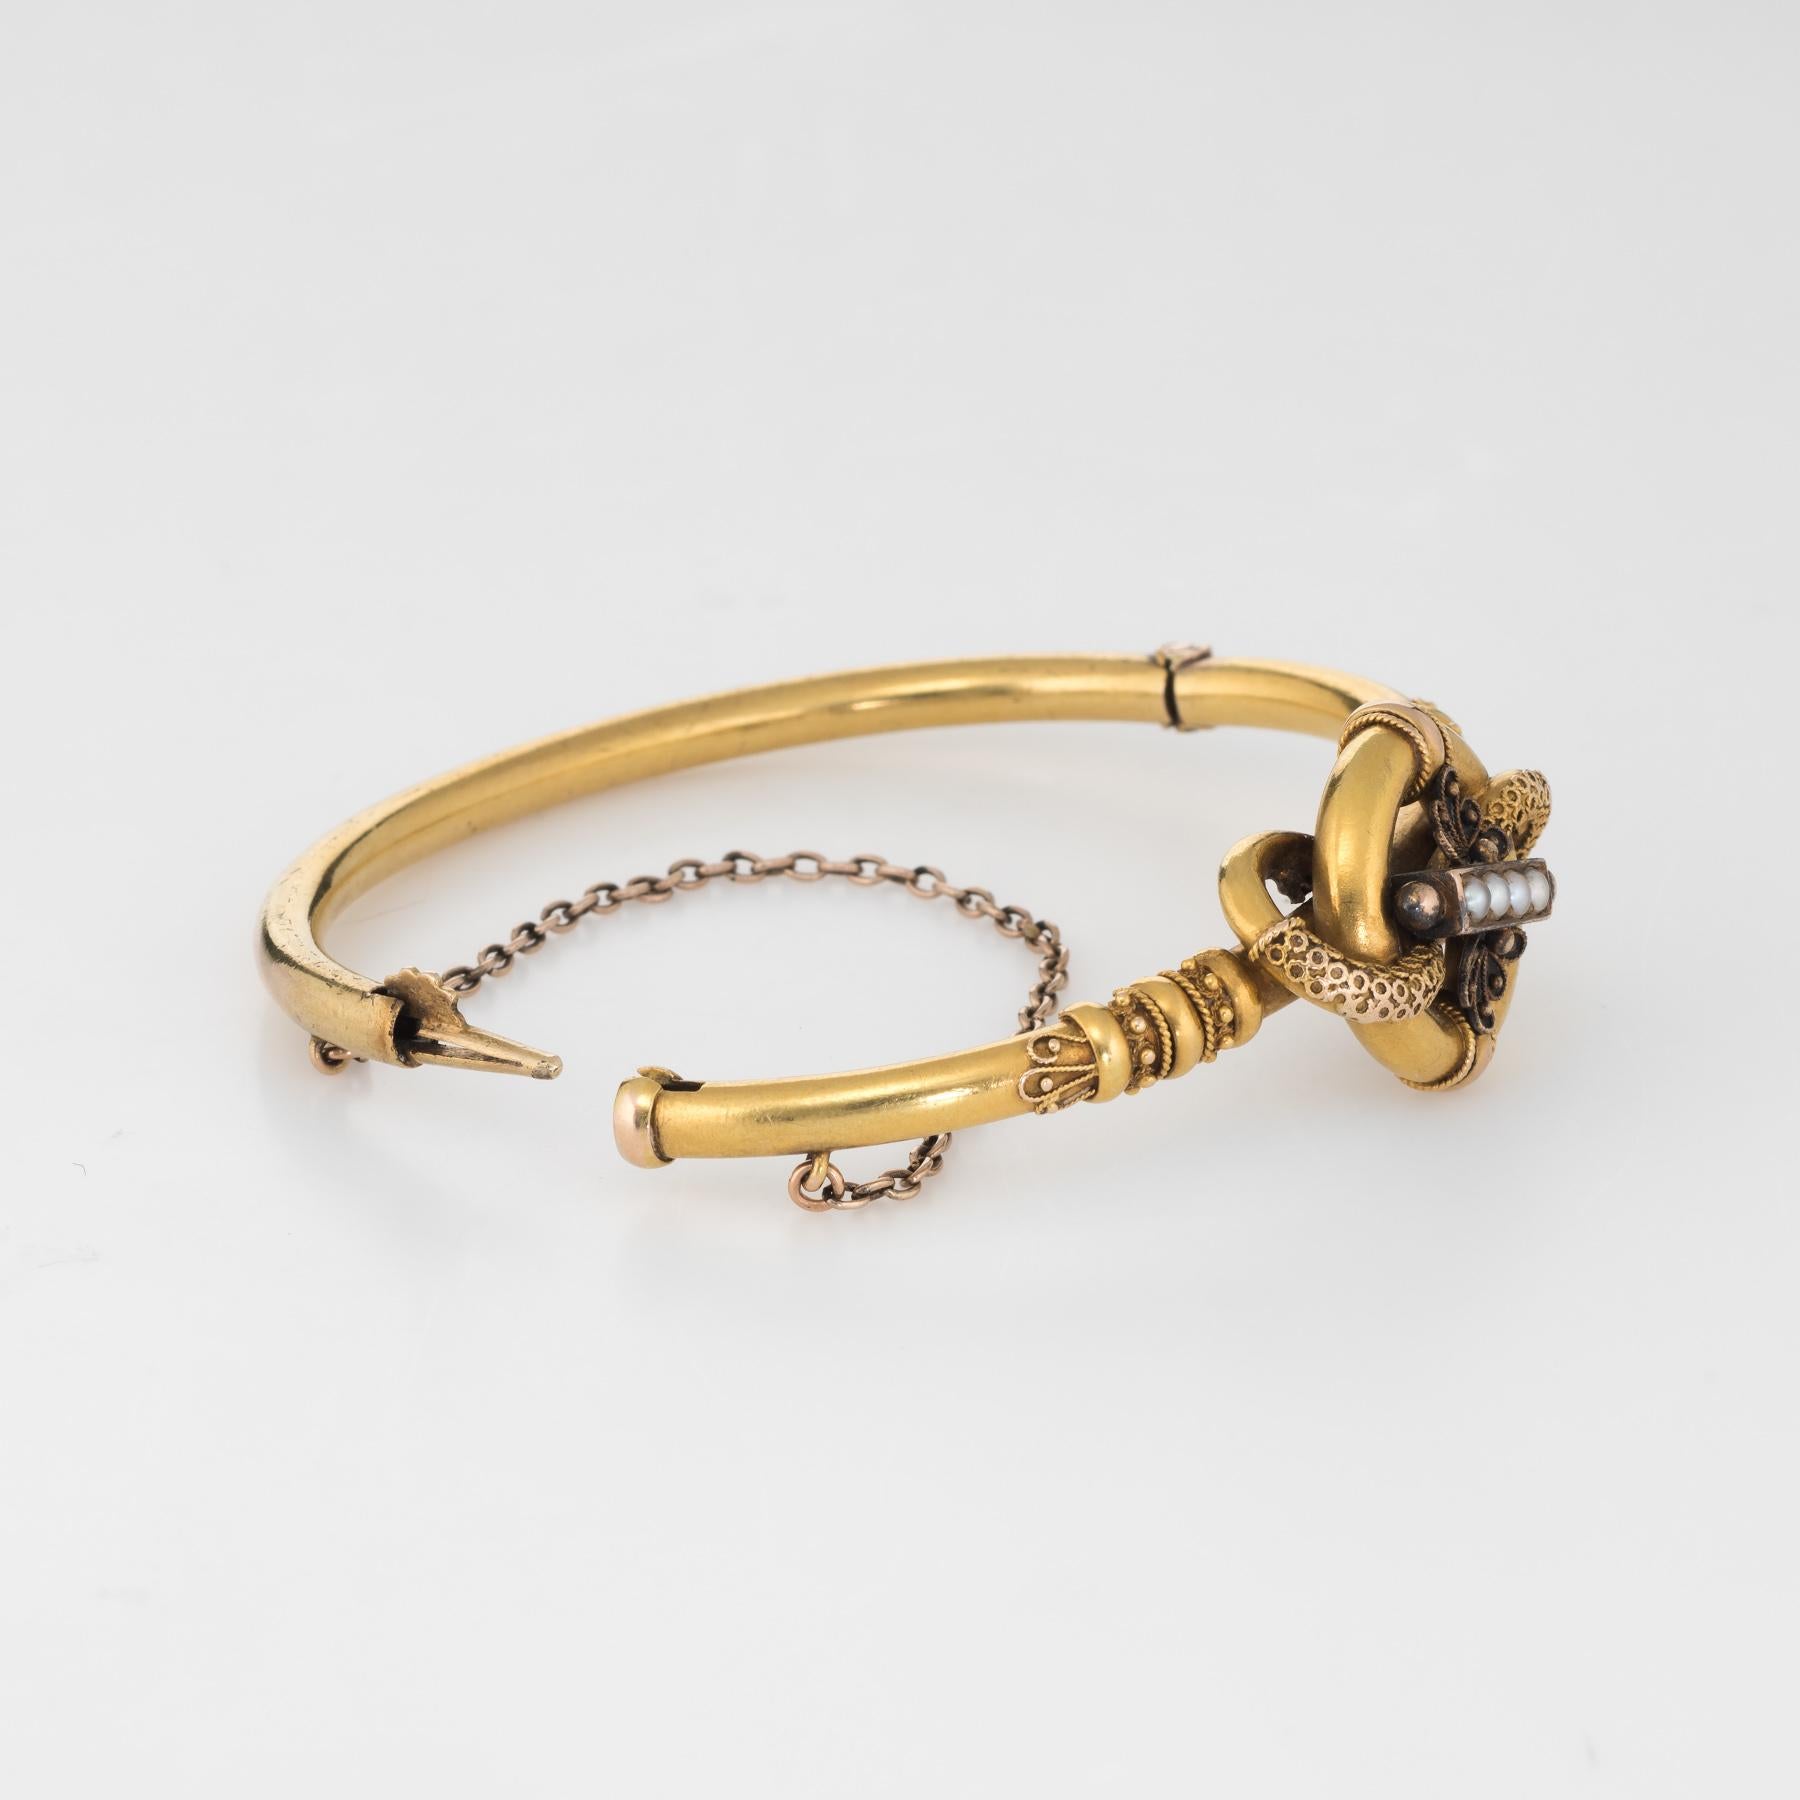 Finely detailed antique Victorian bangle bracelet (circa 1870s to 1880s), crafted in 14k yellow gold. 

Four estimated 1.5mm seed pearls adorn the center of the bracelet.    

The bracelet features classic Etruscan revival ornamentation. The center